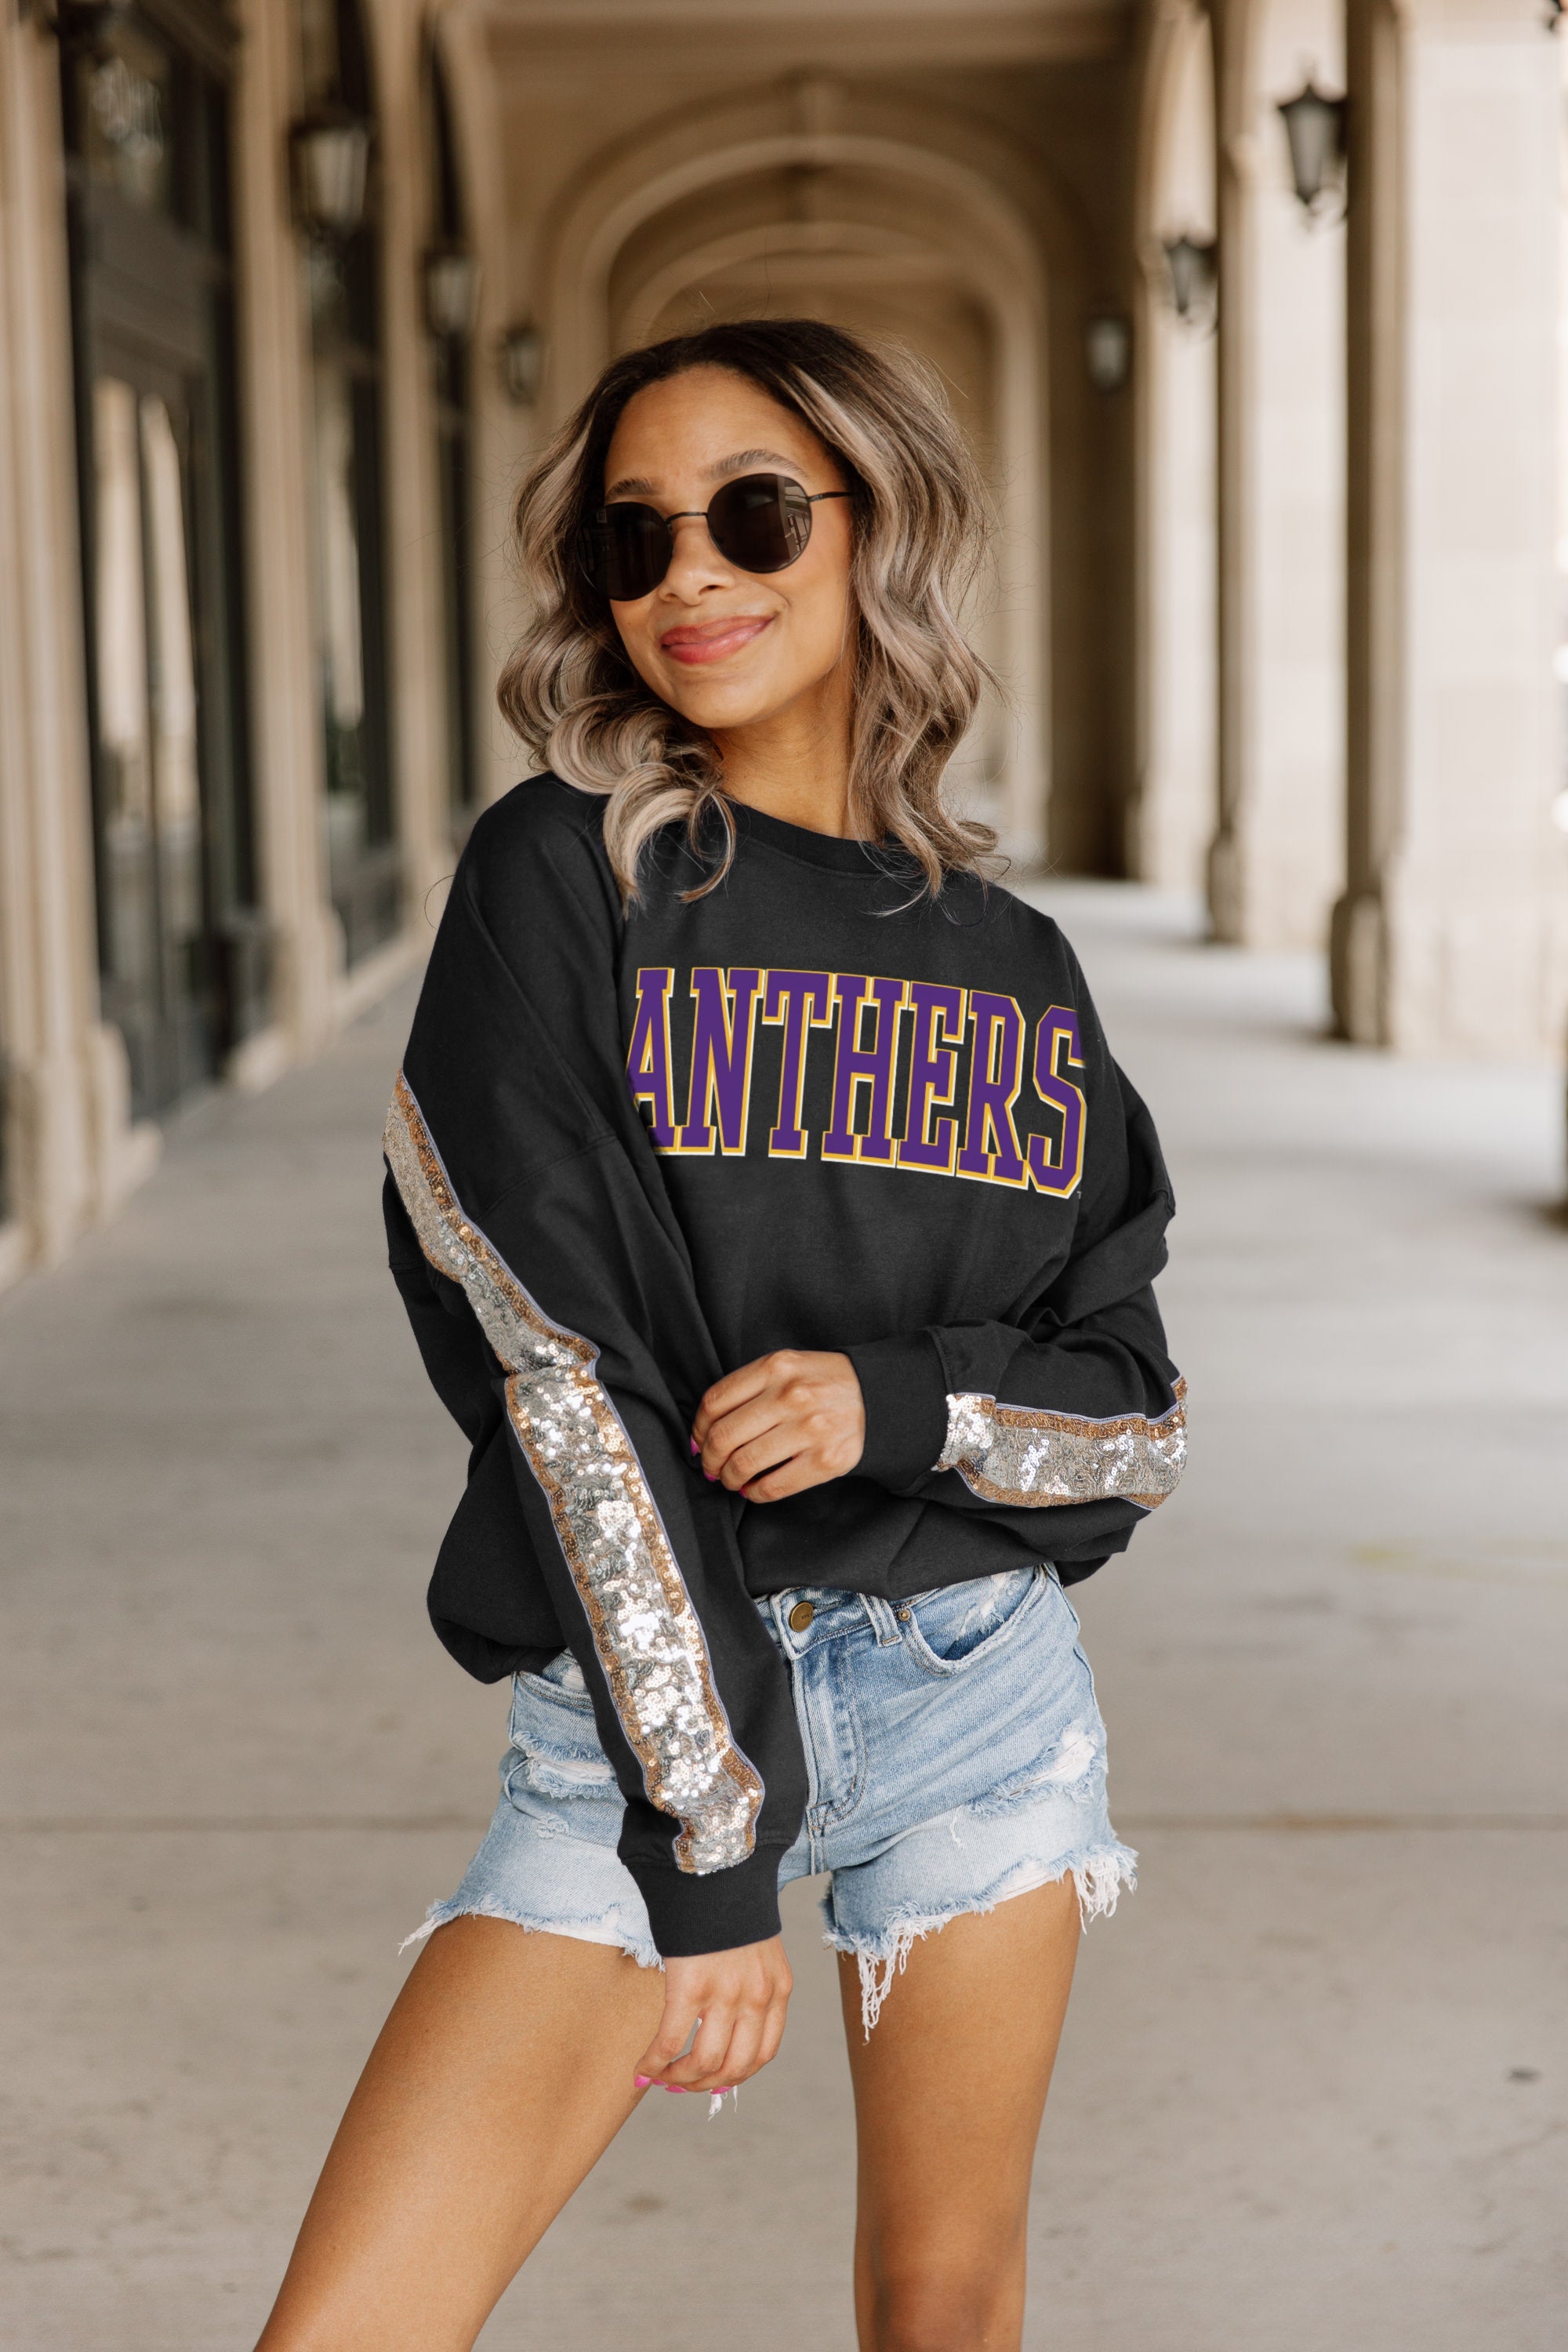 PRAIRIE VIEW A&M PANTHERS GUESS WHO'S BACK SEQUIN YOKE PULLOVER